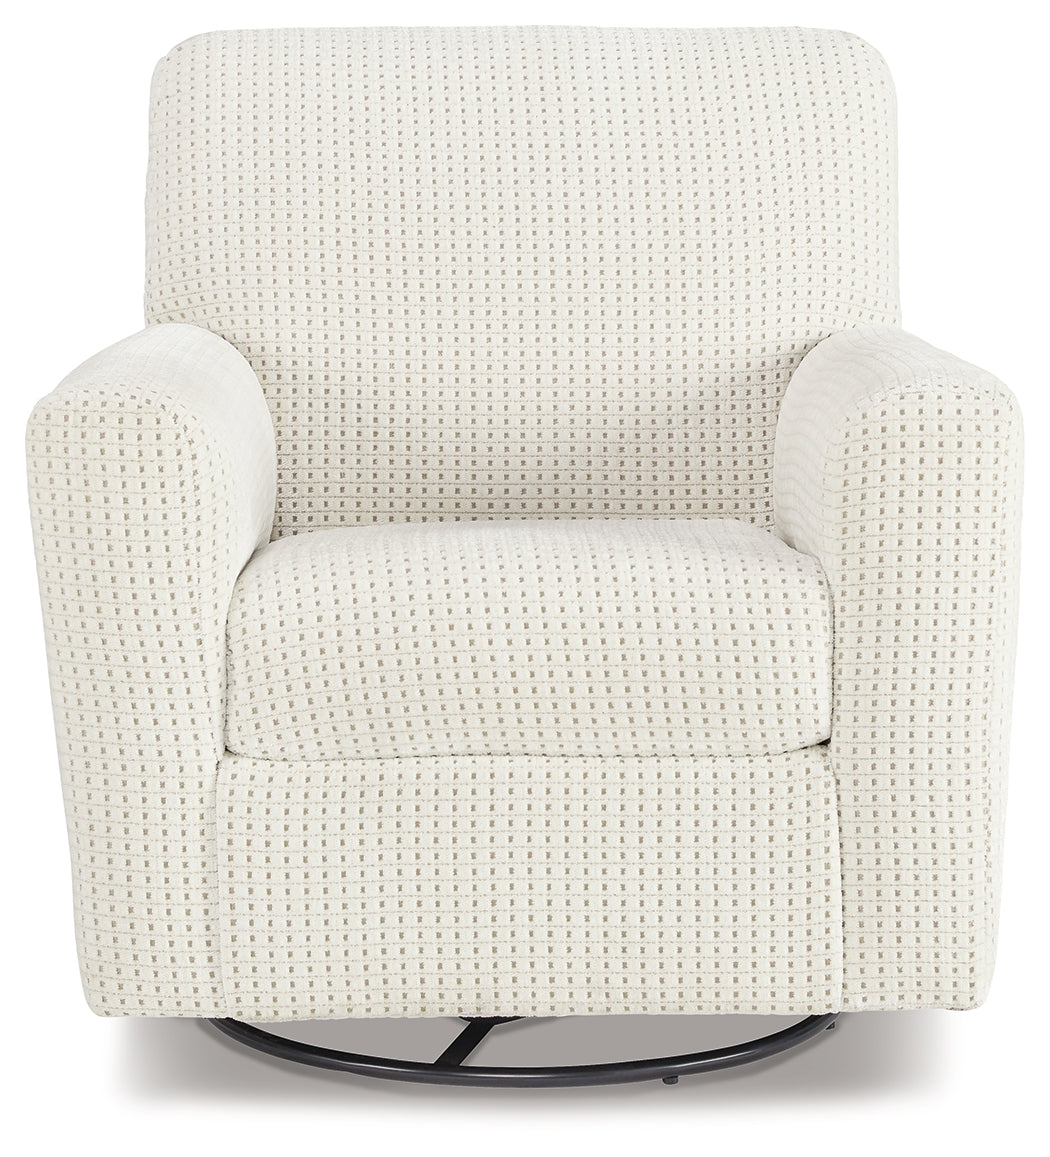 Herstow Ivory Swivel Glider Accent Chair - A3000365 - Bien Home Furniture &amp; Electronics